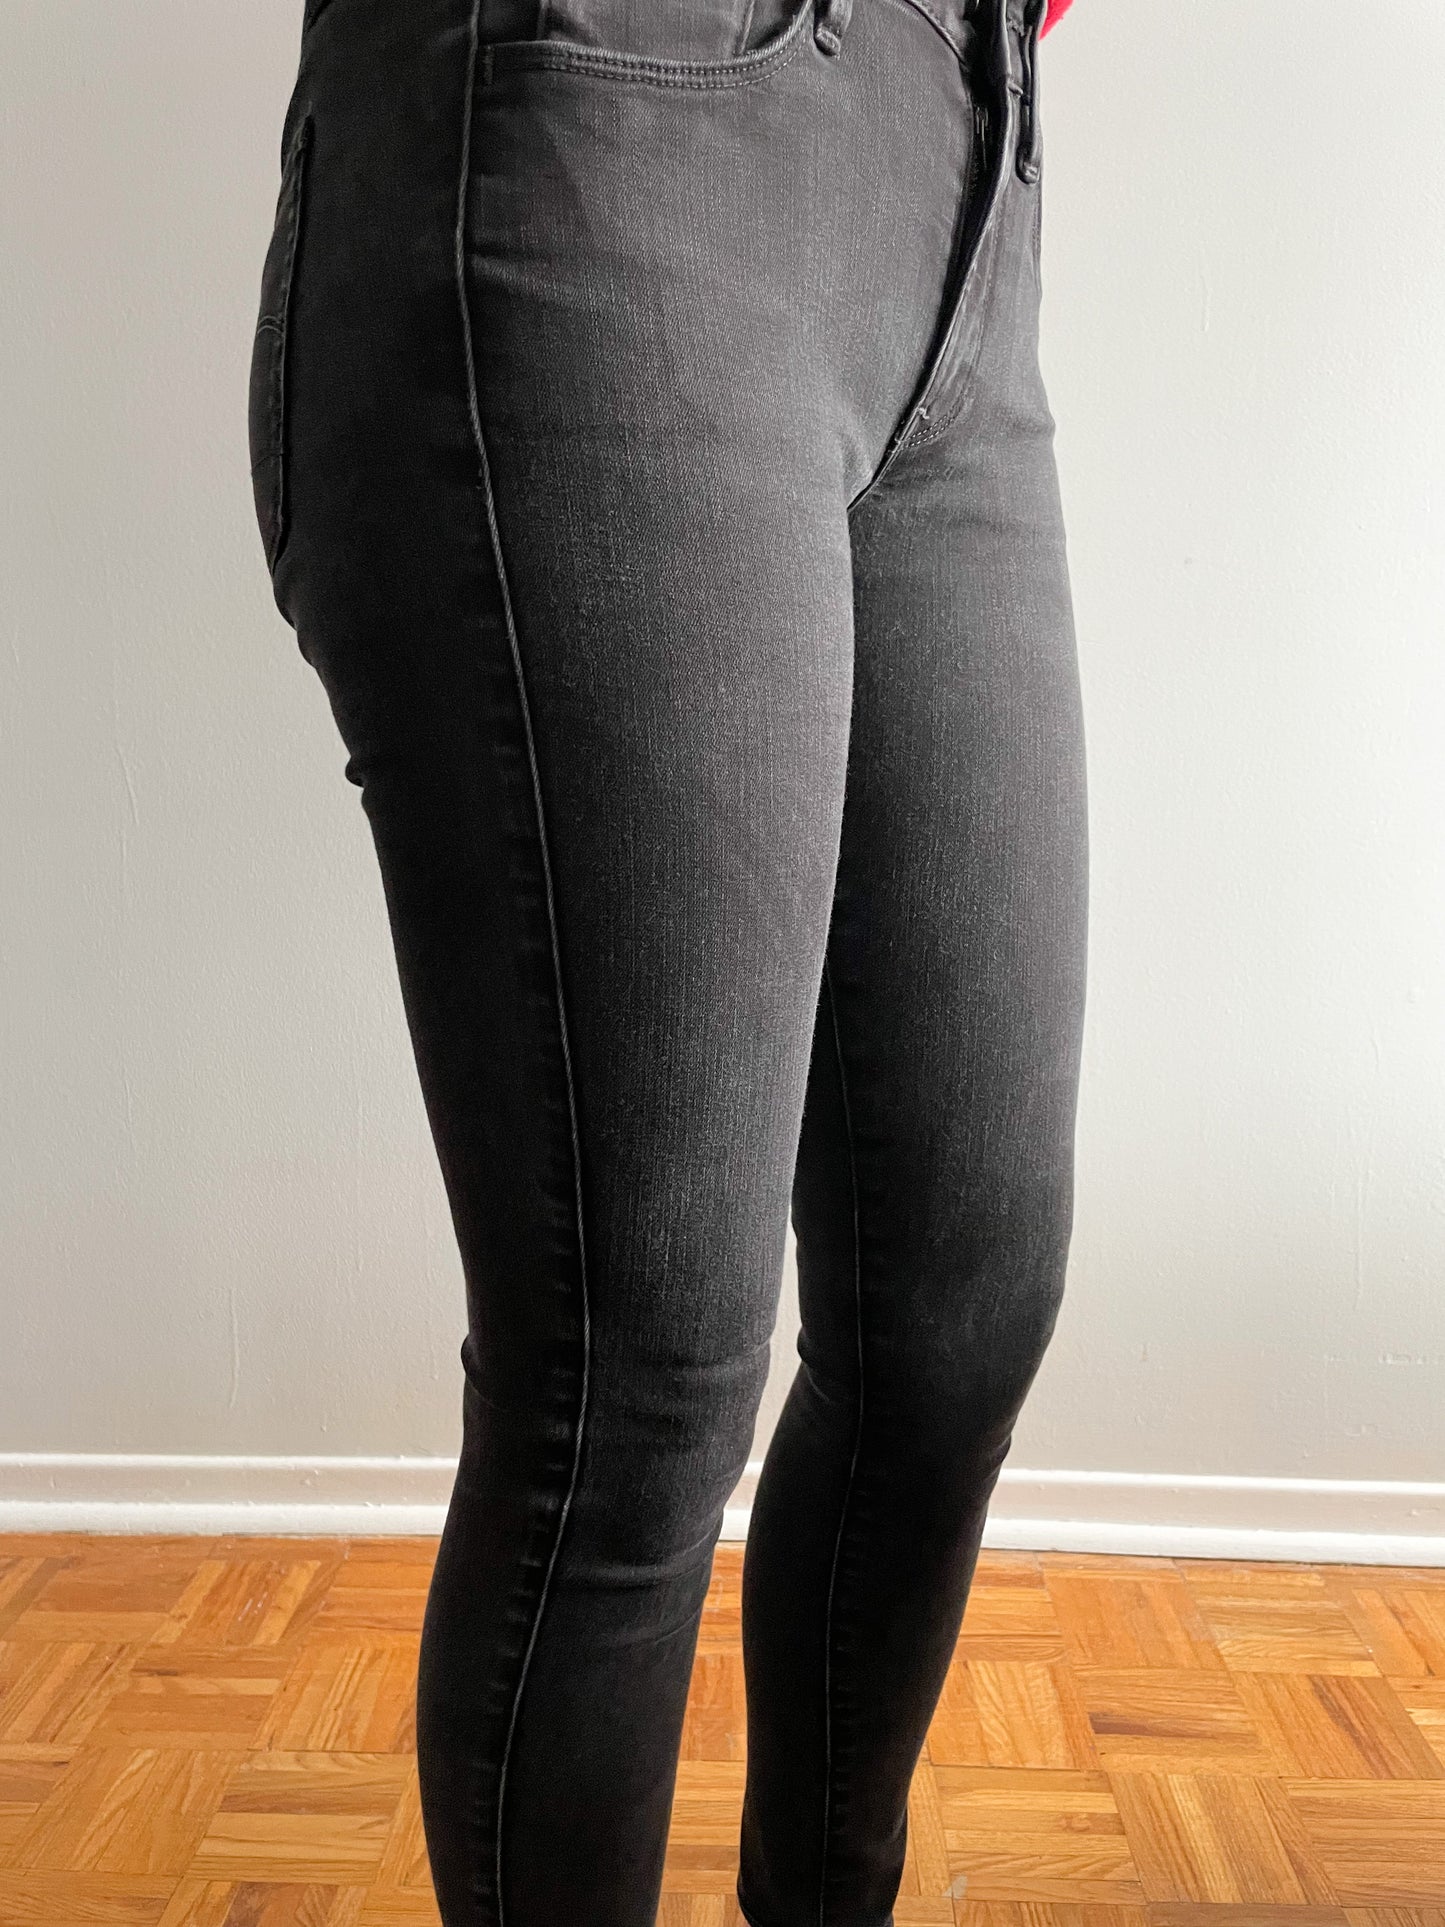 G Star Raw Dusty Grey Black Mid Rise Skinny Jeans - 24/28 (XS) – Le Prix  Fashion & Consulting